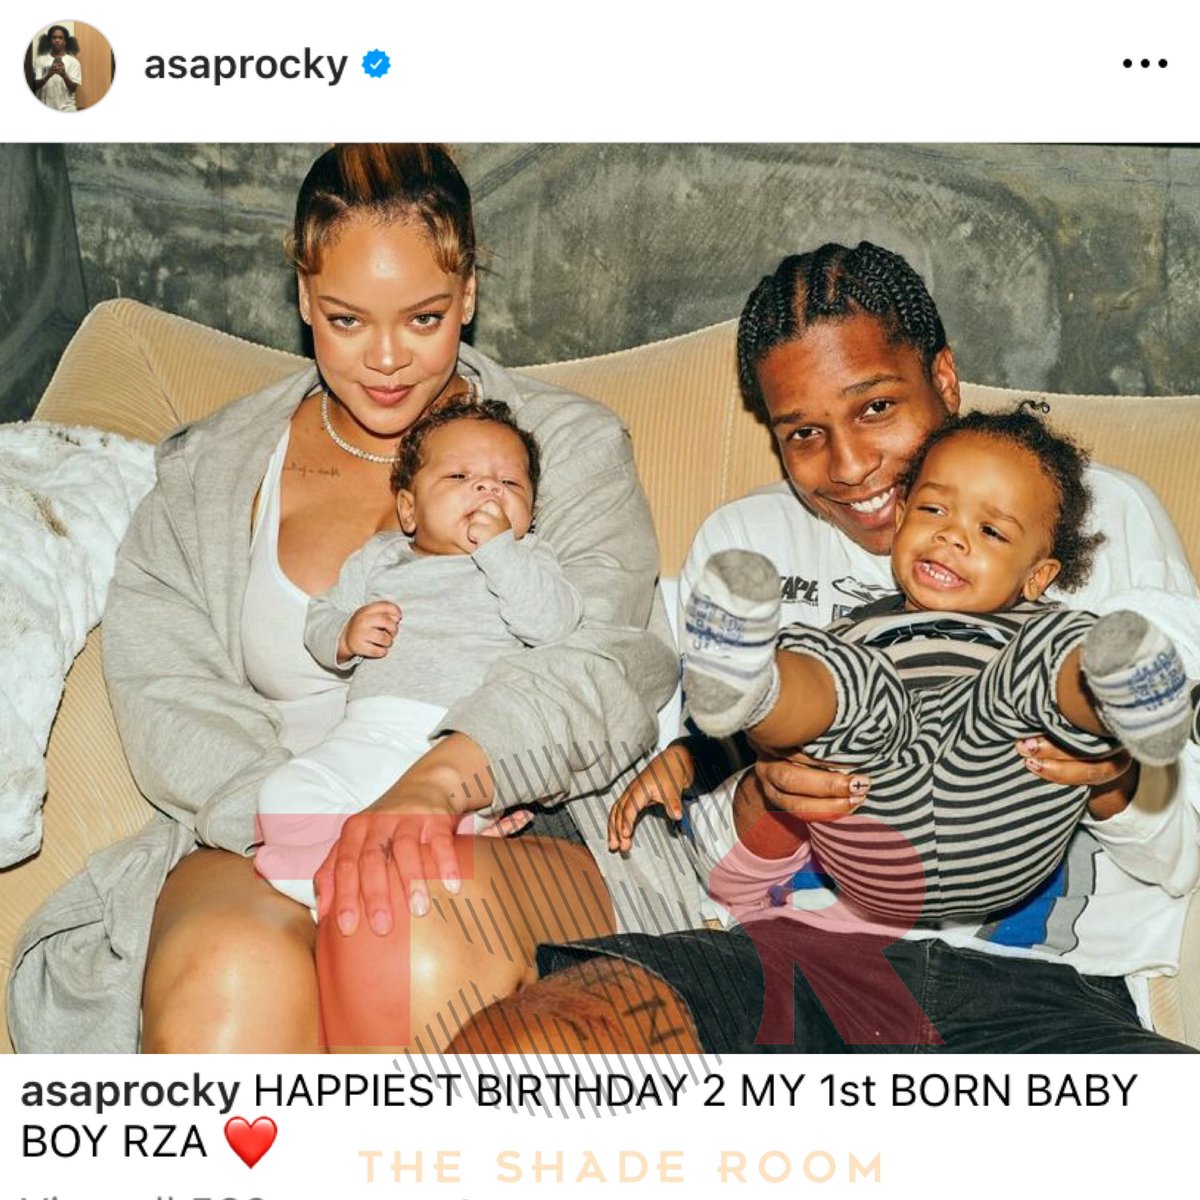 Mayers boys! A$AP Rocky shares some pictures of his boys and RiRi as RZA recently celebrates his birthday. ❤️ ✍🏾#TSRStaffAS